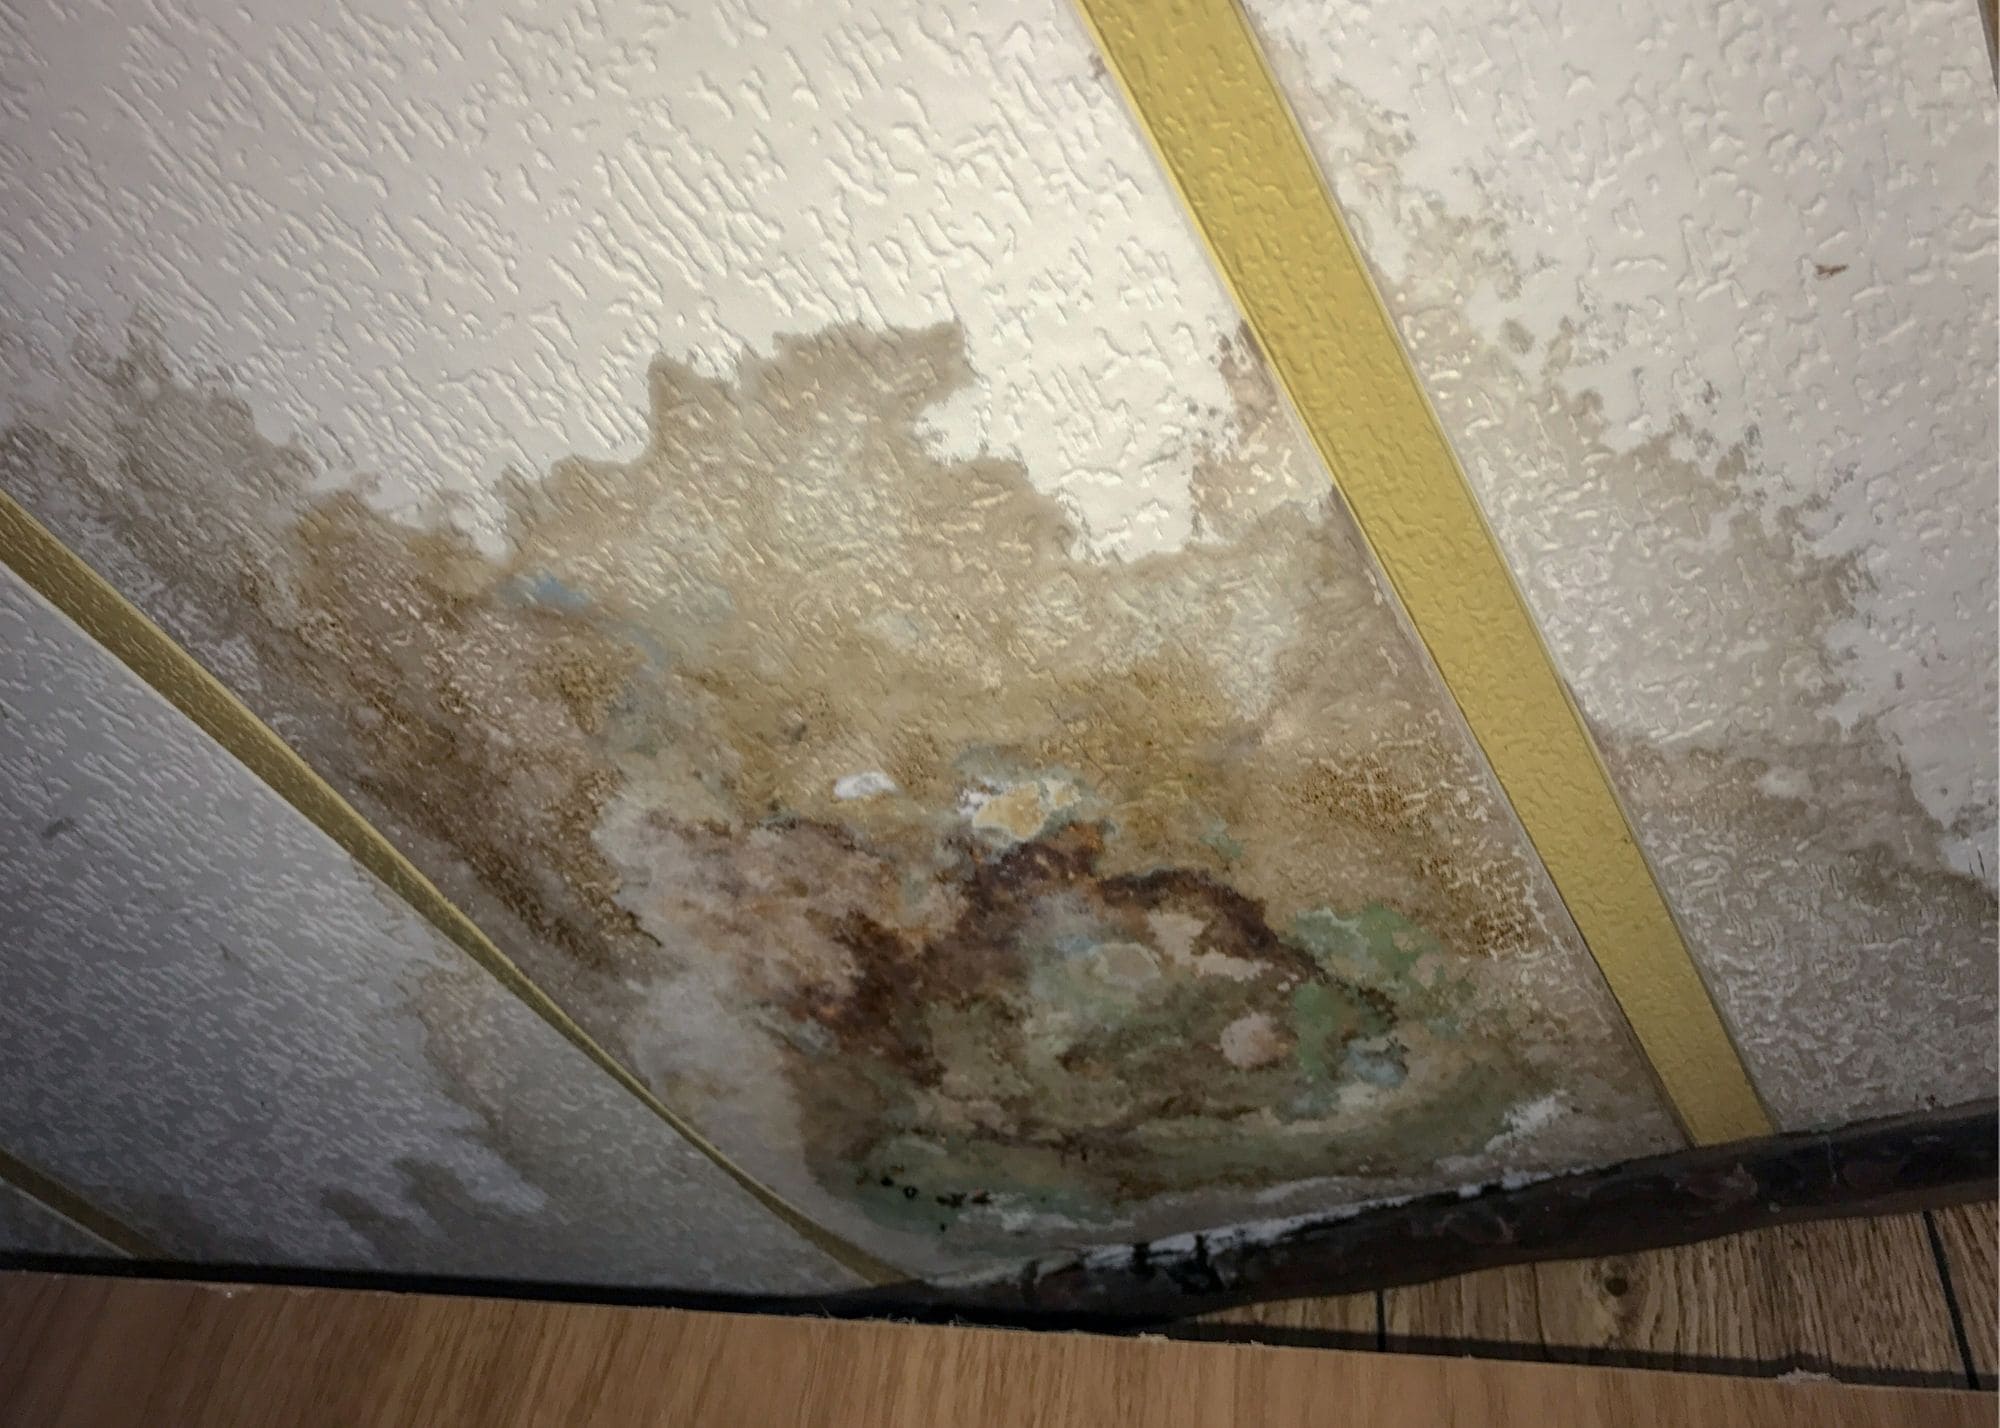 Brookes Water Damage Experts